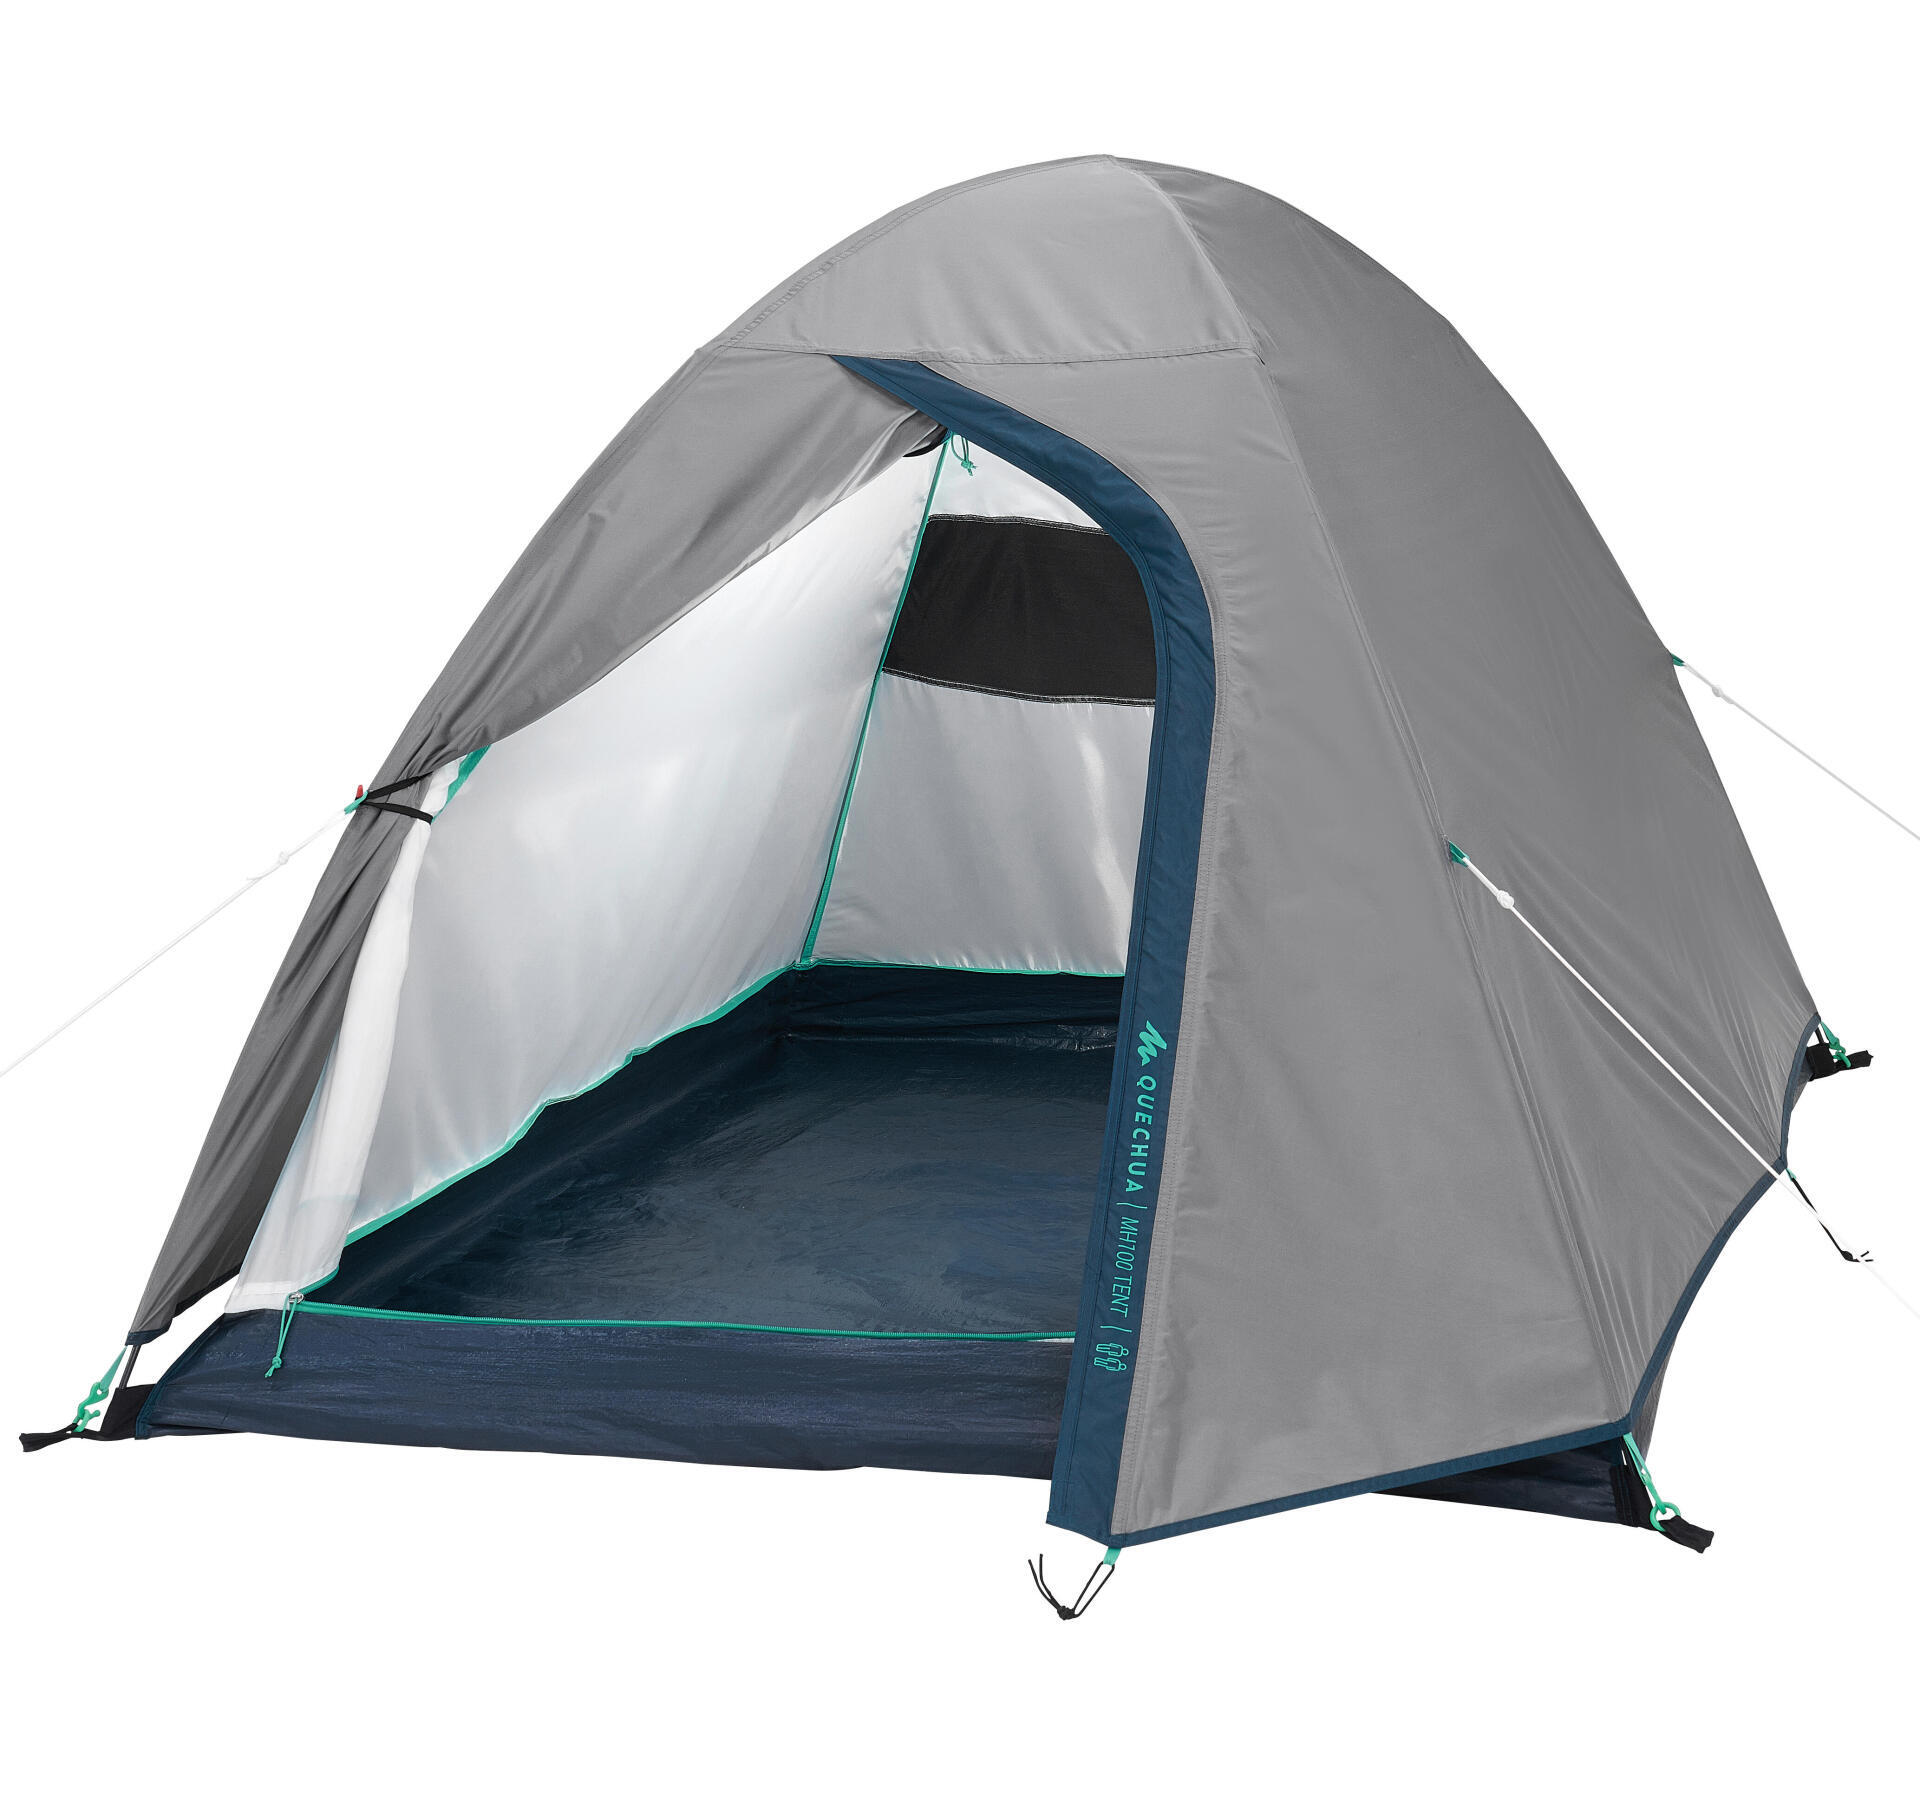 CAMPING TENT MH100 - 2 PERSON